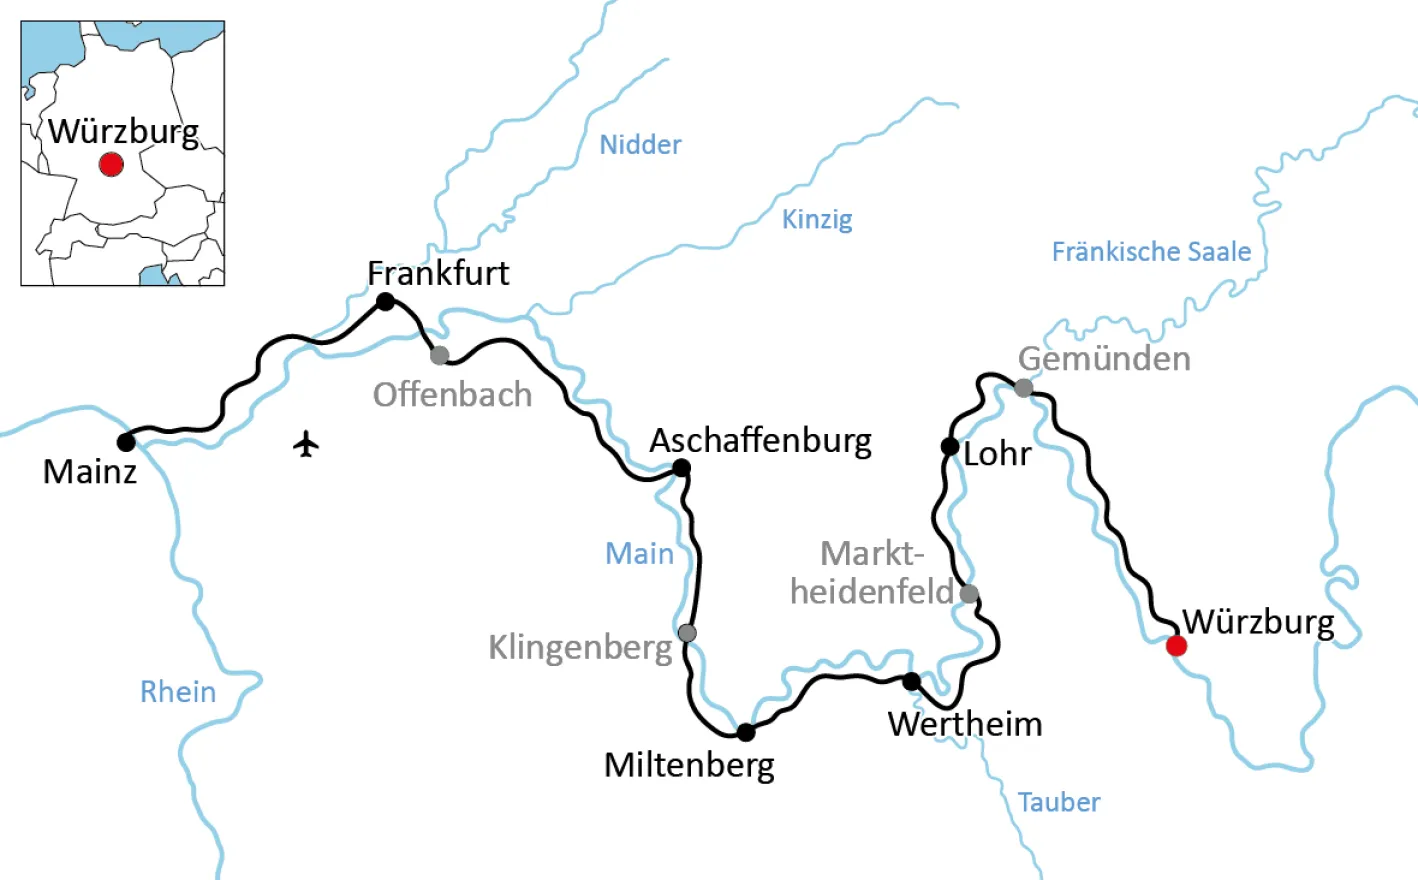 Map for Bike Trip along the Main from Würzburg to Mainz